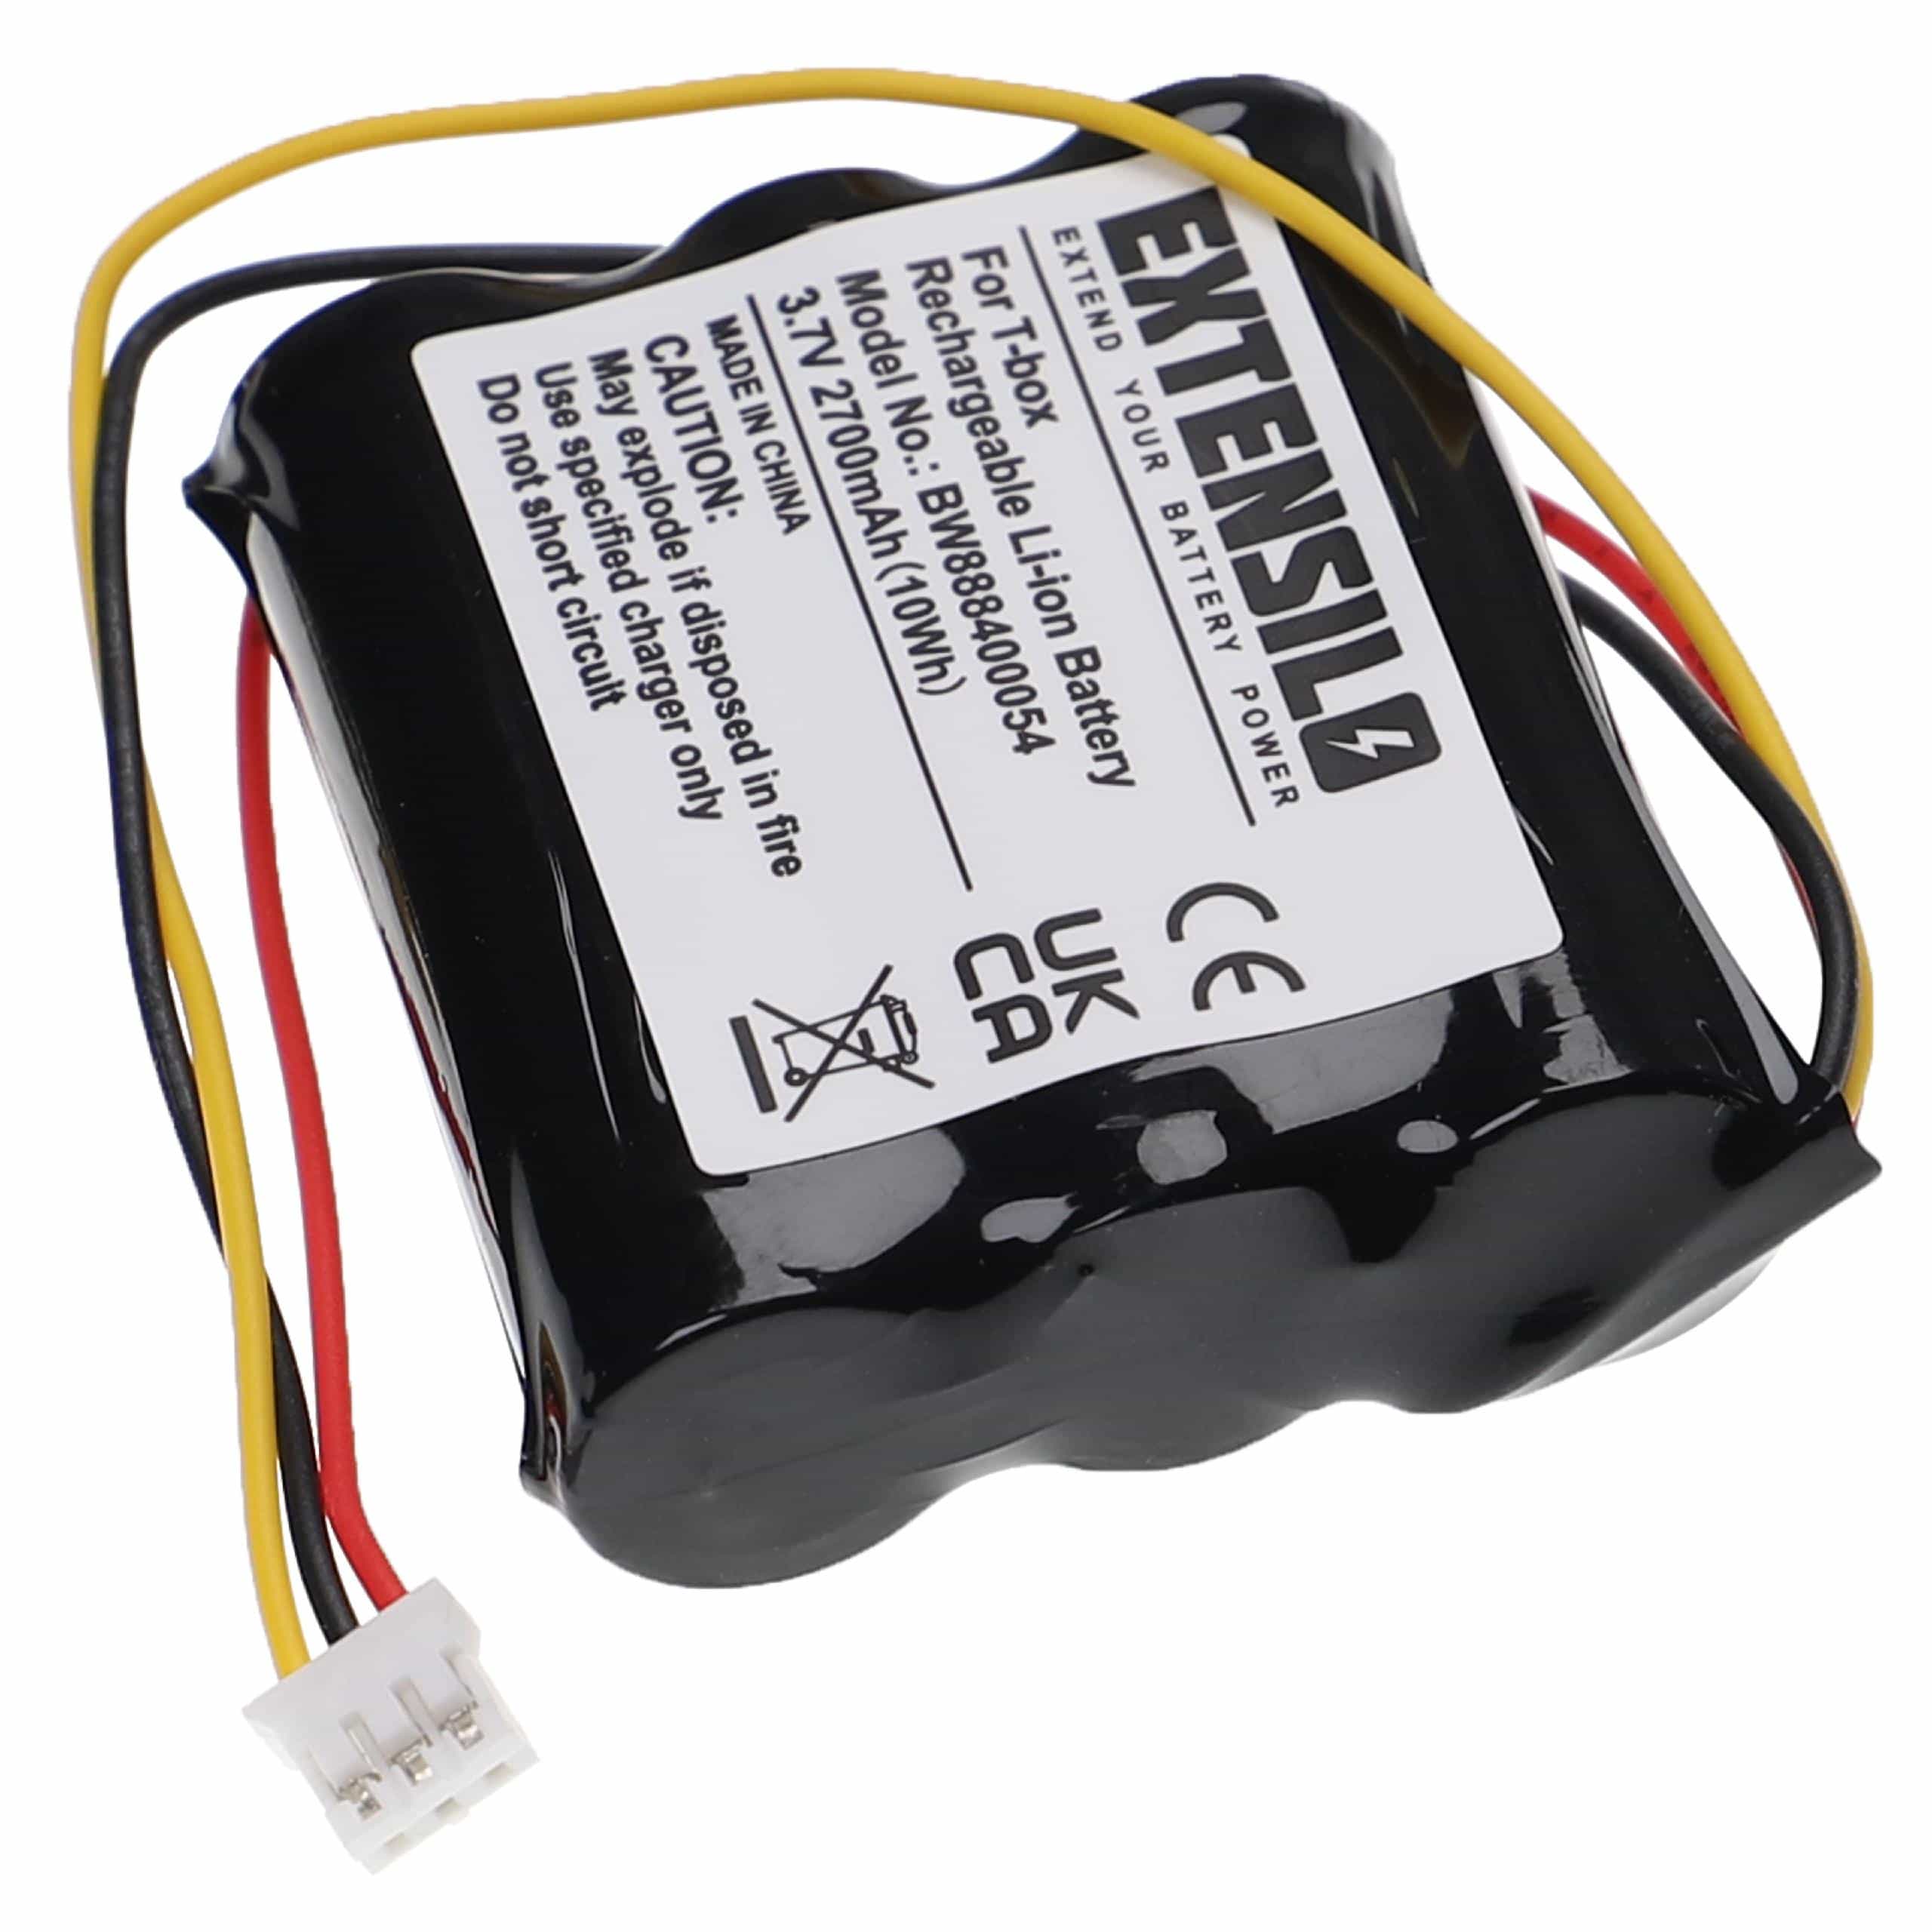 EXTENSILO Music Box Battery Replacement for tonies 50AA5S - 2700mAh 3.7V Li-Ion